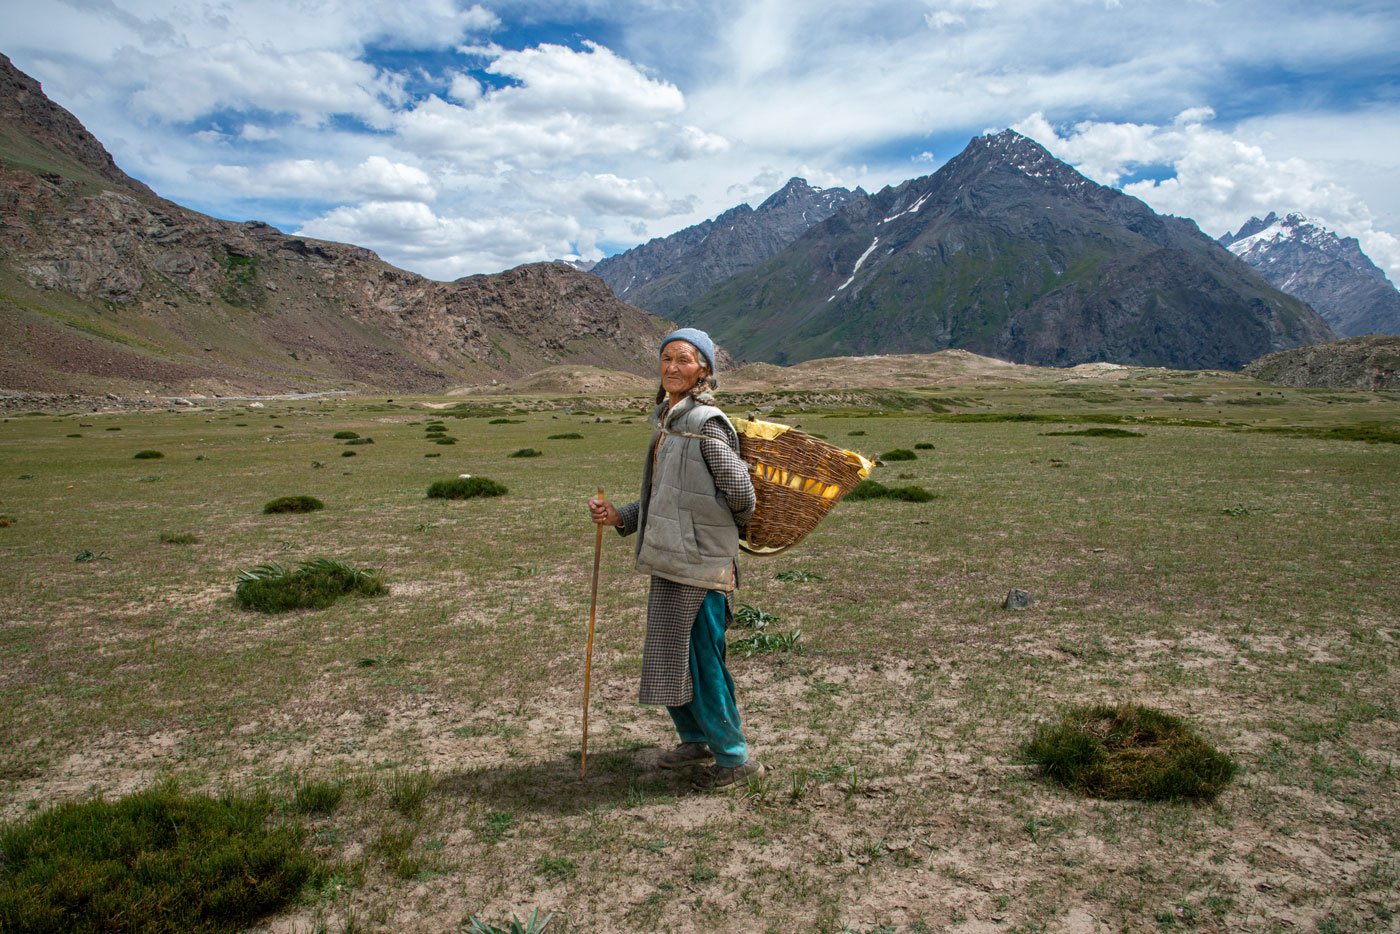 Tsering Angmo returning from collecting yak dung